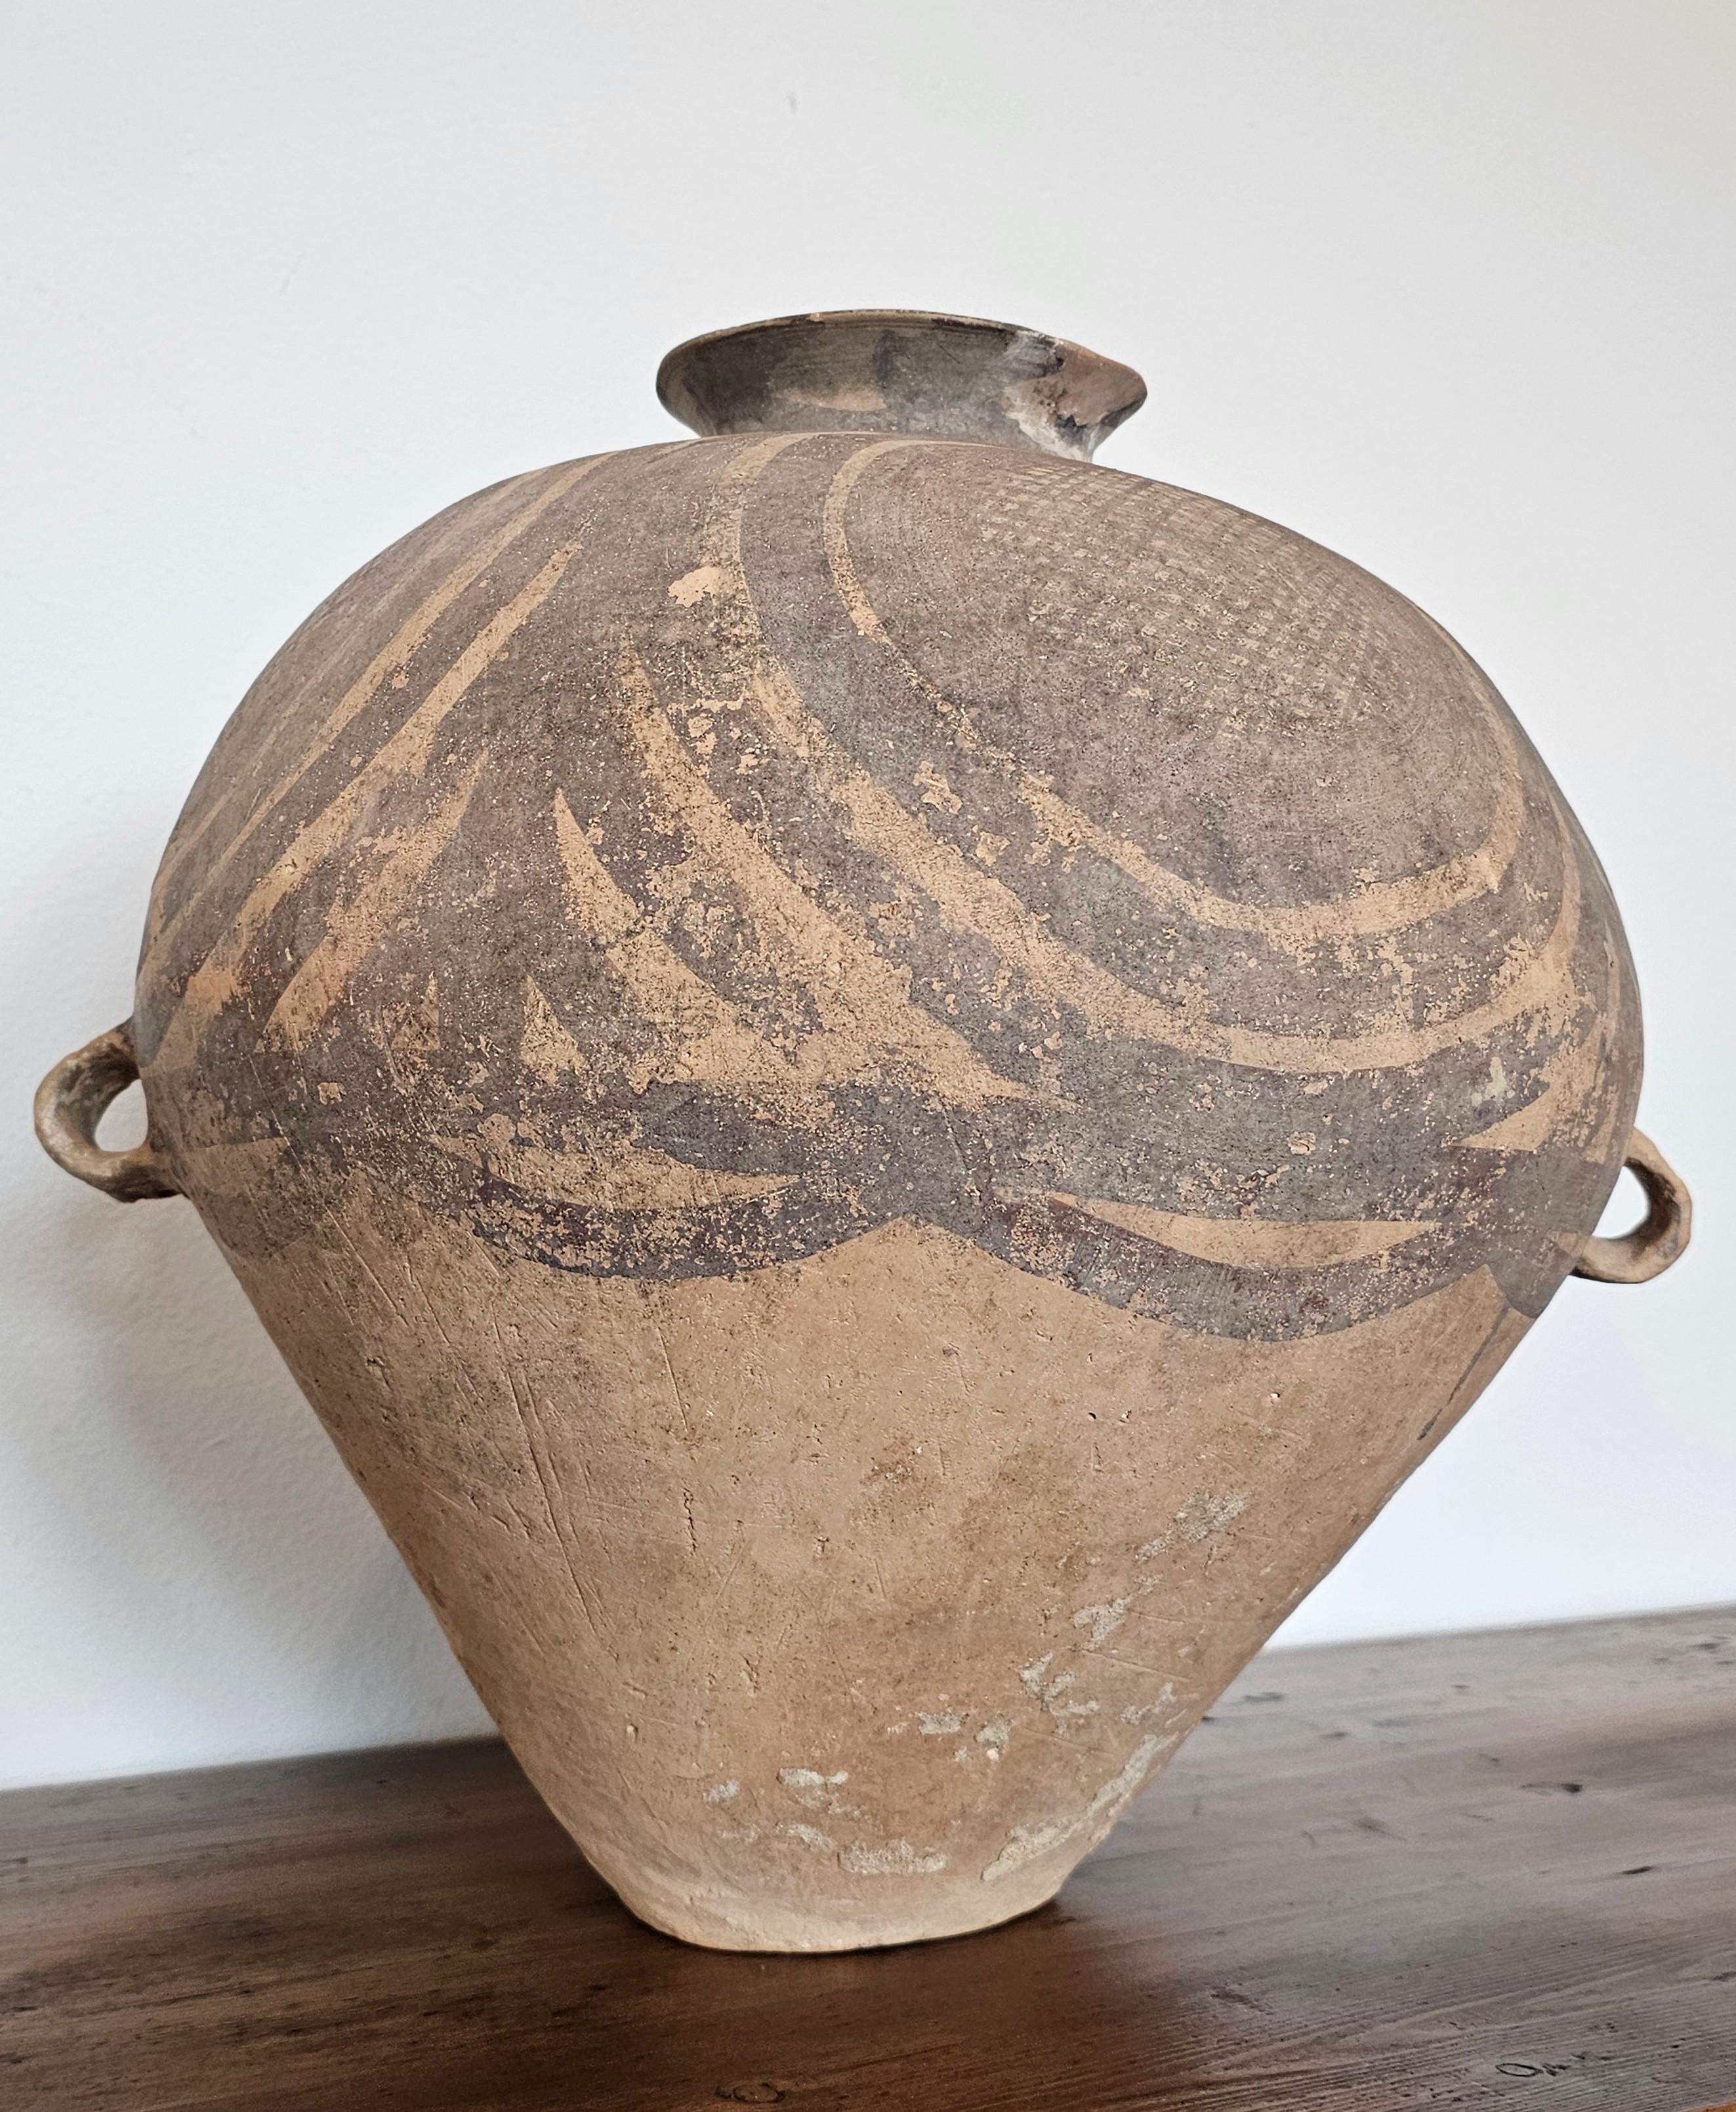 A rare Chinese Neolithic period Majiayao culture / possibly late Yangshao culture, Banshan type, Gansu Province, Northern China, 3rd-2nd Millennium B.C., large earthenware water jar (hu)

Having a globular upper body with flared mouth and loop